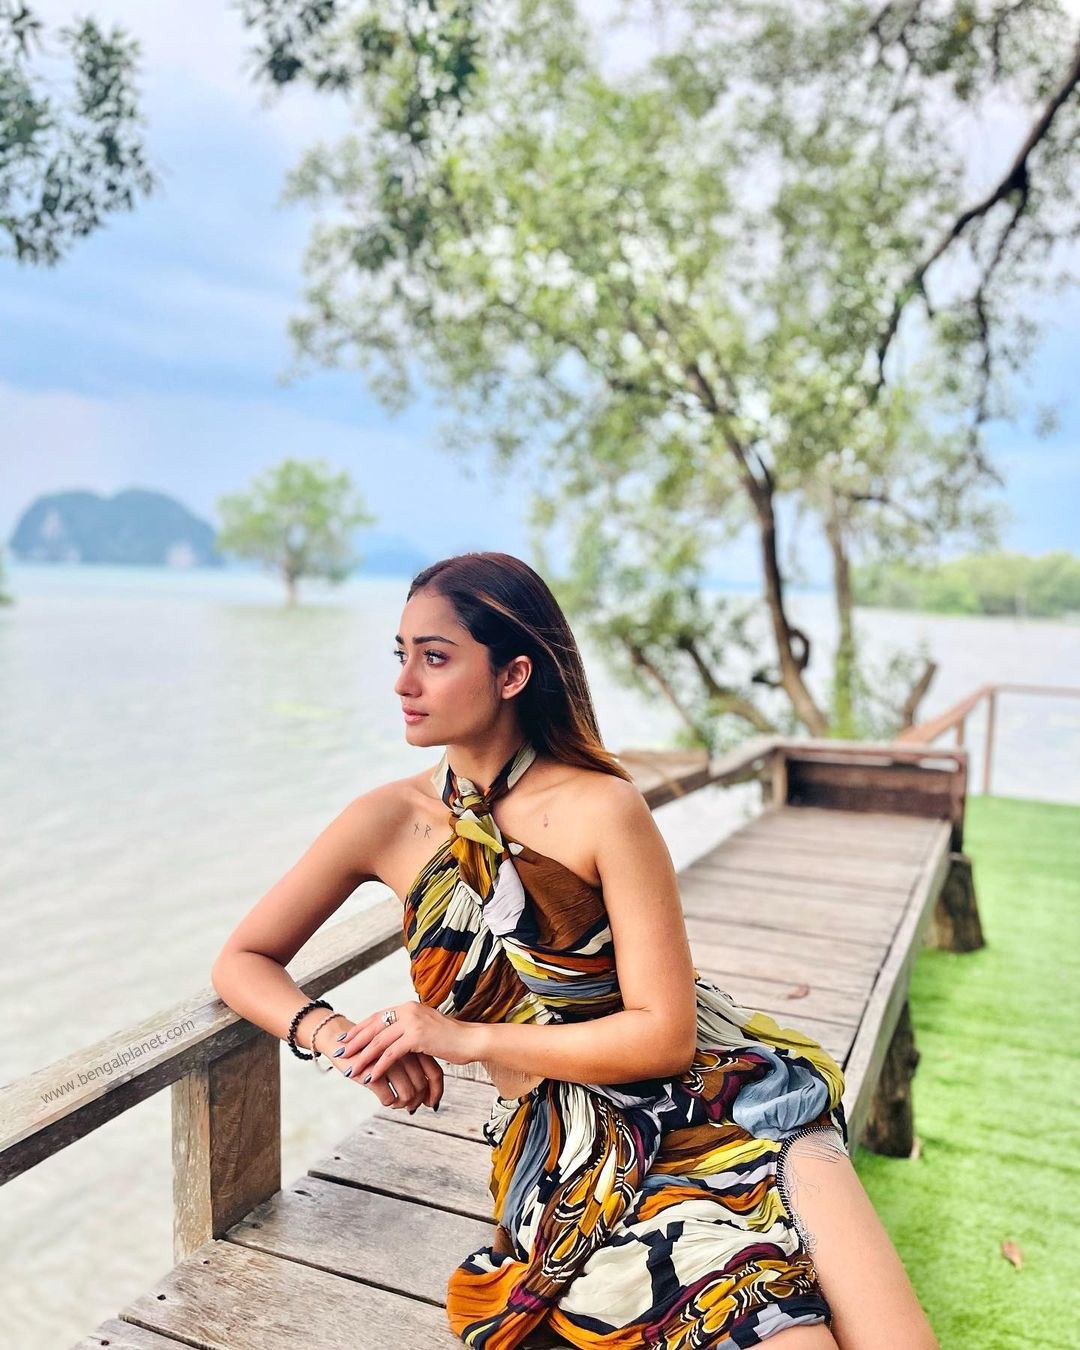 Tridha-Choudhury-looks-chic-hot-and-classy-in-these-pictures-16-Bengalplanet.com